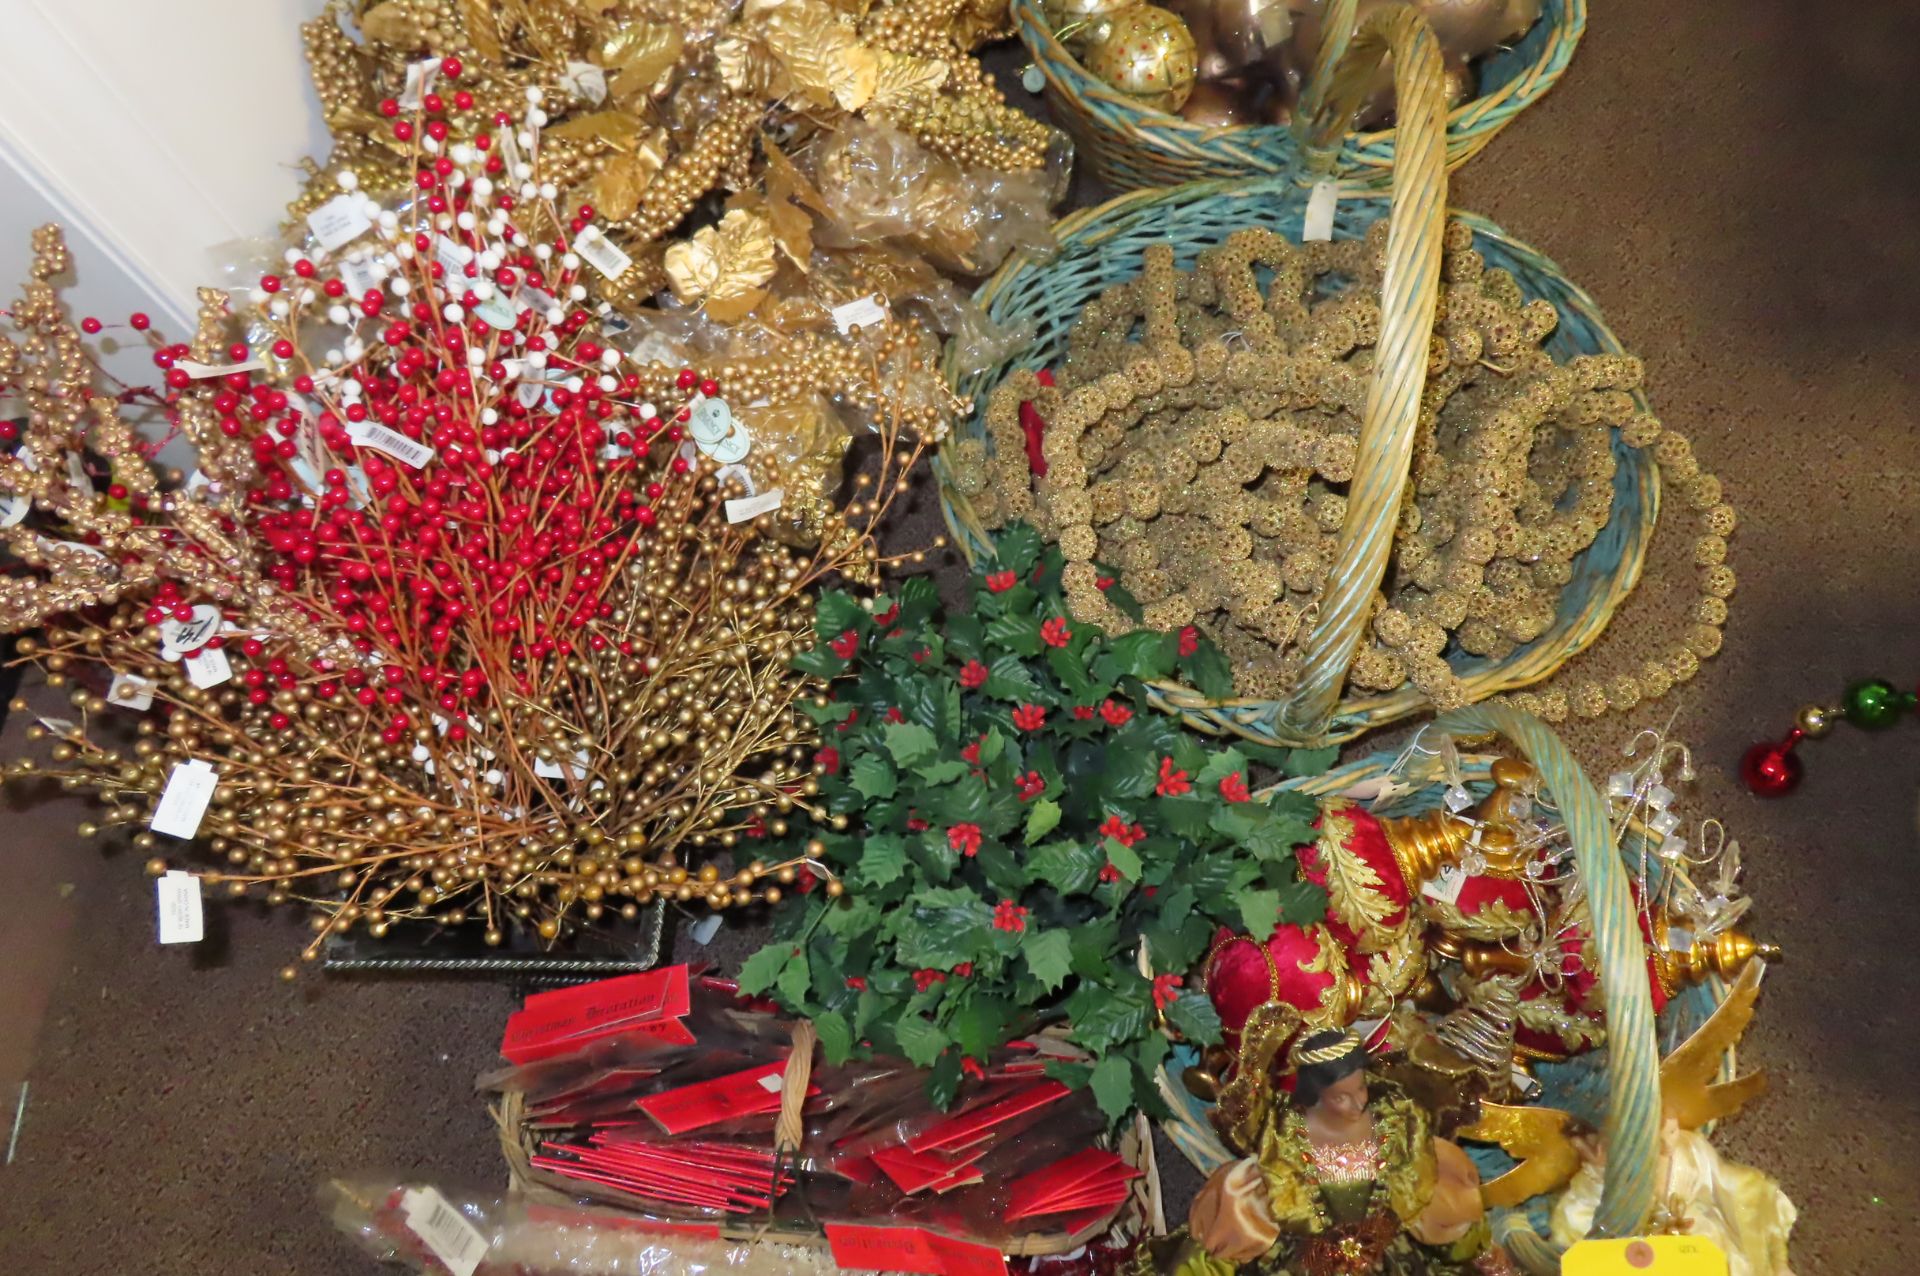 XMAS FLOWERS AND ORNAMENTS, (2) ANGELS, GOLD DECORATIVE ROPE AND RIBBON, (2) TIN… - Image 6 of 10